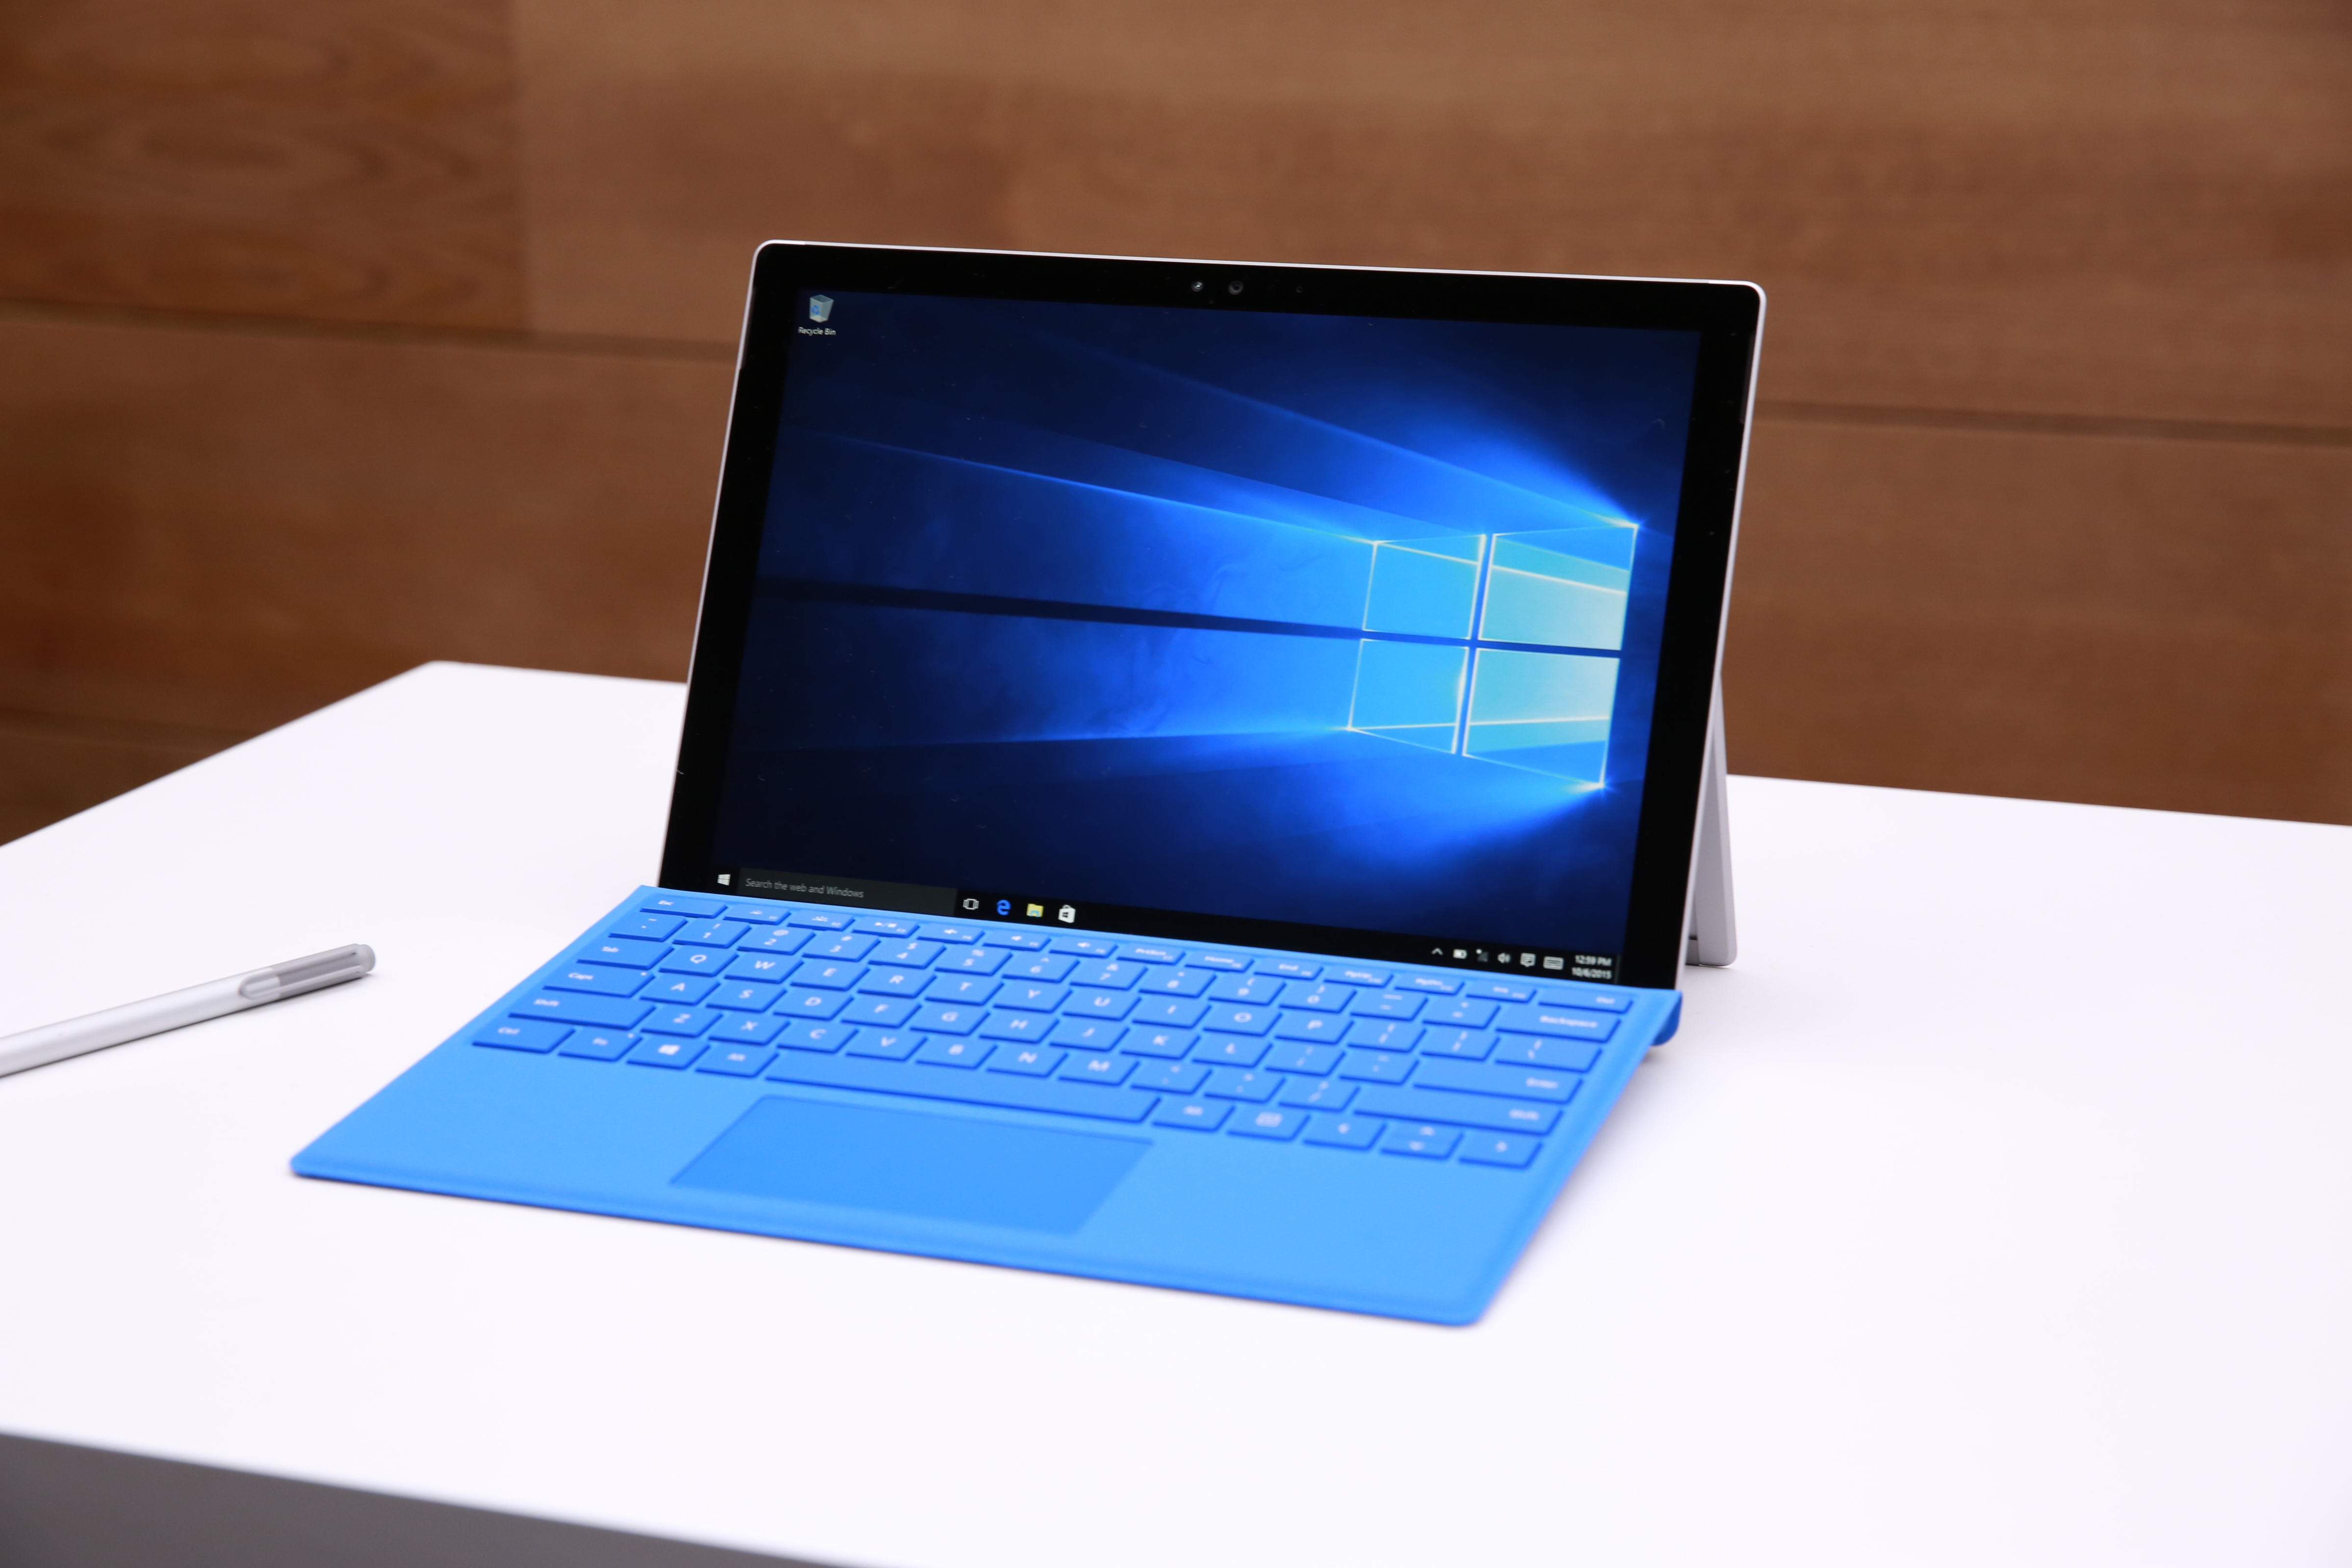 The Microsoft Surface Pro becomes another of personal computing’s Holy Grails